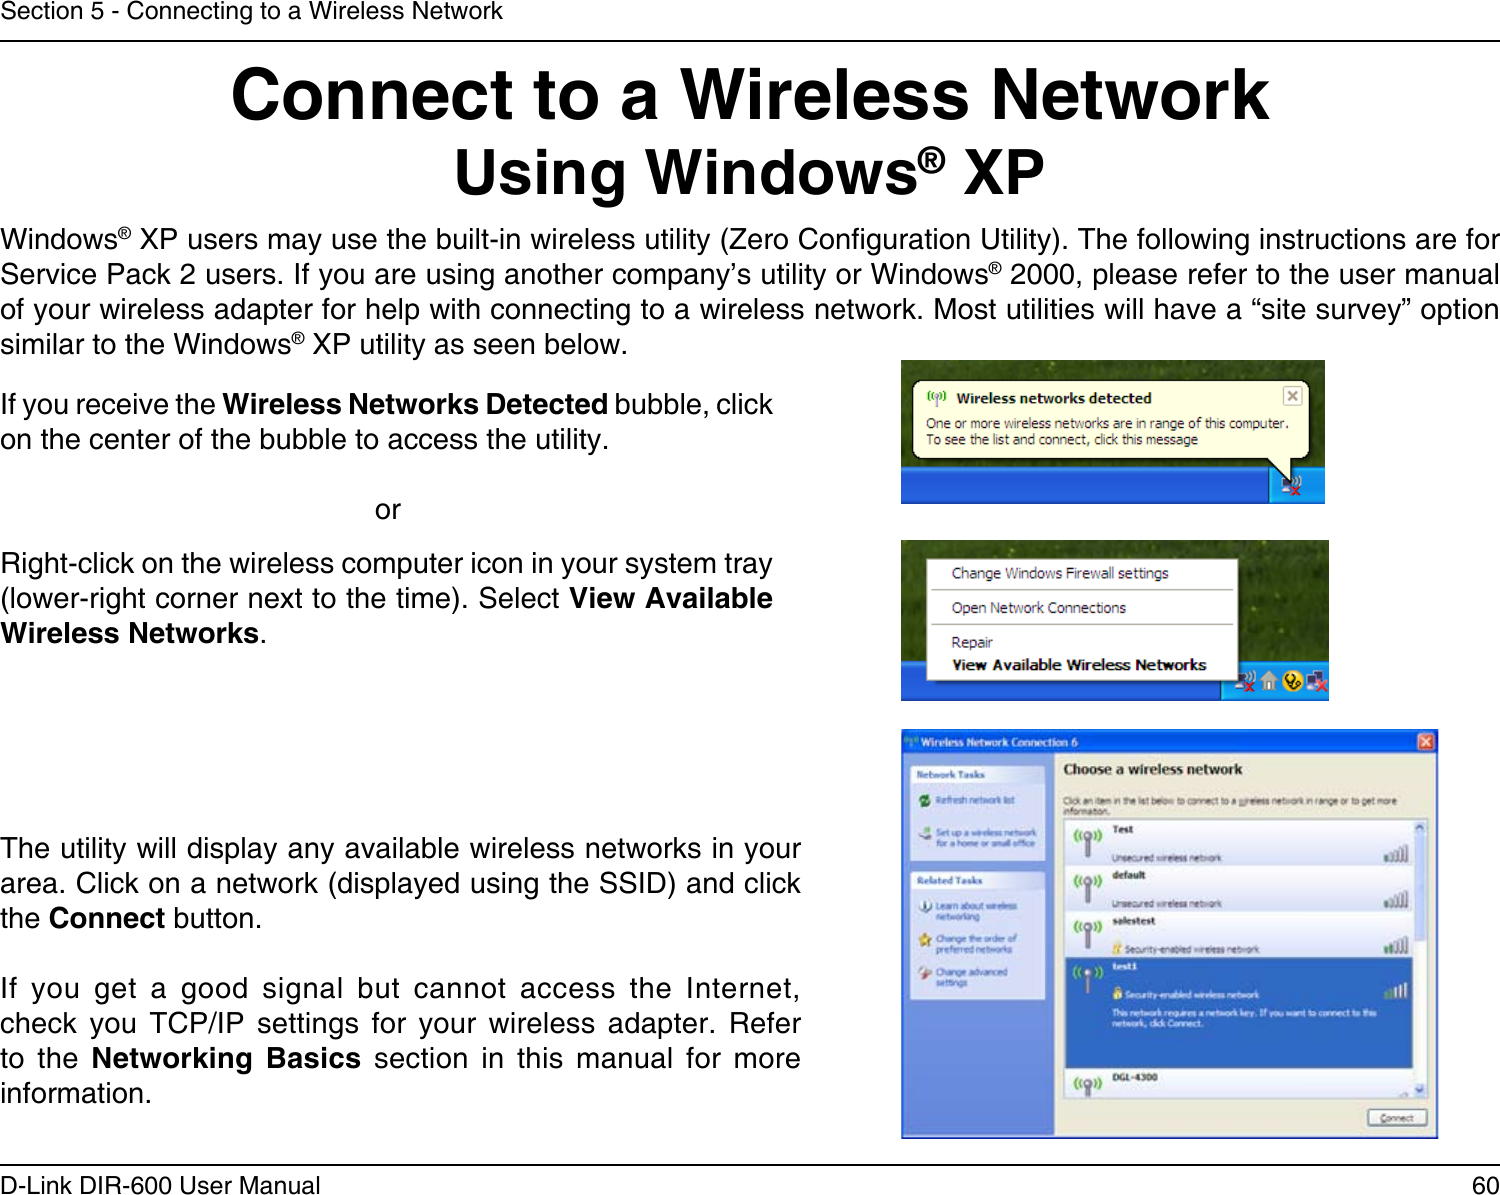 60D-Link DIR-600 User ManualSection 5 - Connecting to a Wireless NetworkConnect to a Wireless NetworkUsing Windows® XPWindows® XP users may use the built-in wireless utility (Zero Conguration Utility). The following instructions are for Service Pack 2 users. If you are using another company’s utility or Windows® 2000, please refer to the user manual of your wireless adapter for help with connecting to a wireless network. Most utilities will have a “site survey” option similar to the Windows® XP utility as seen below.Right-click on the wireless computer icon in your system tray (lower-right corner next to the time). Select View Available Wireless Networks.If you receive the Wireless Networks Detected bubble, click on the center of the bubble to access the utility.     orThe utility will display any available wireless networks in your area. Click on a network (displayed using the SSID) and click the Connect button.If  you  get  a  good  signal  but  cannot  access  the  Internet, check  you  TCP/IP  settings  for  your  wireless  adapter.  Refer to  the  Networking  Basics  section  in  this  manual  for  more information.